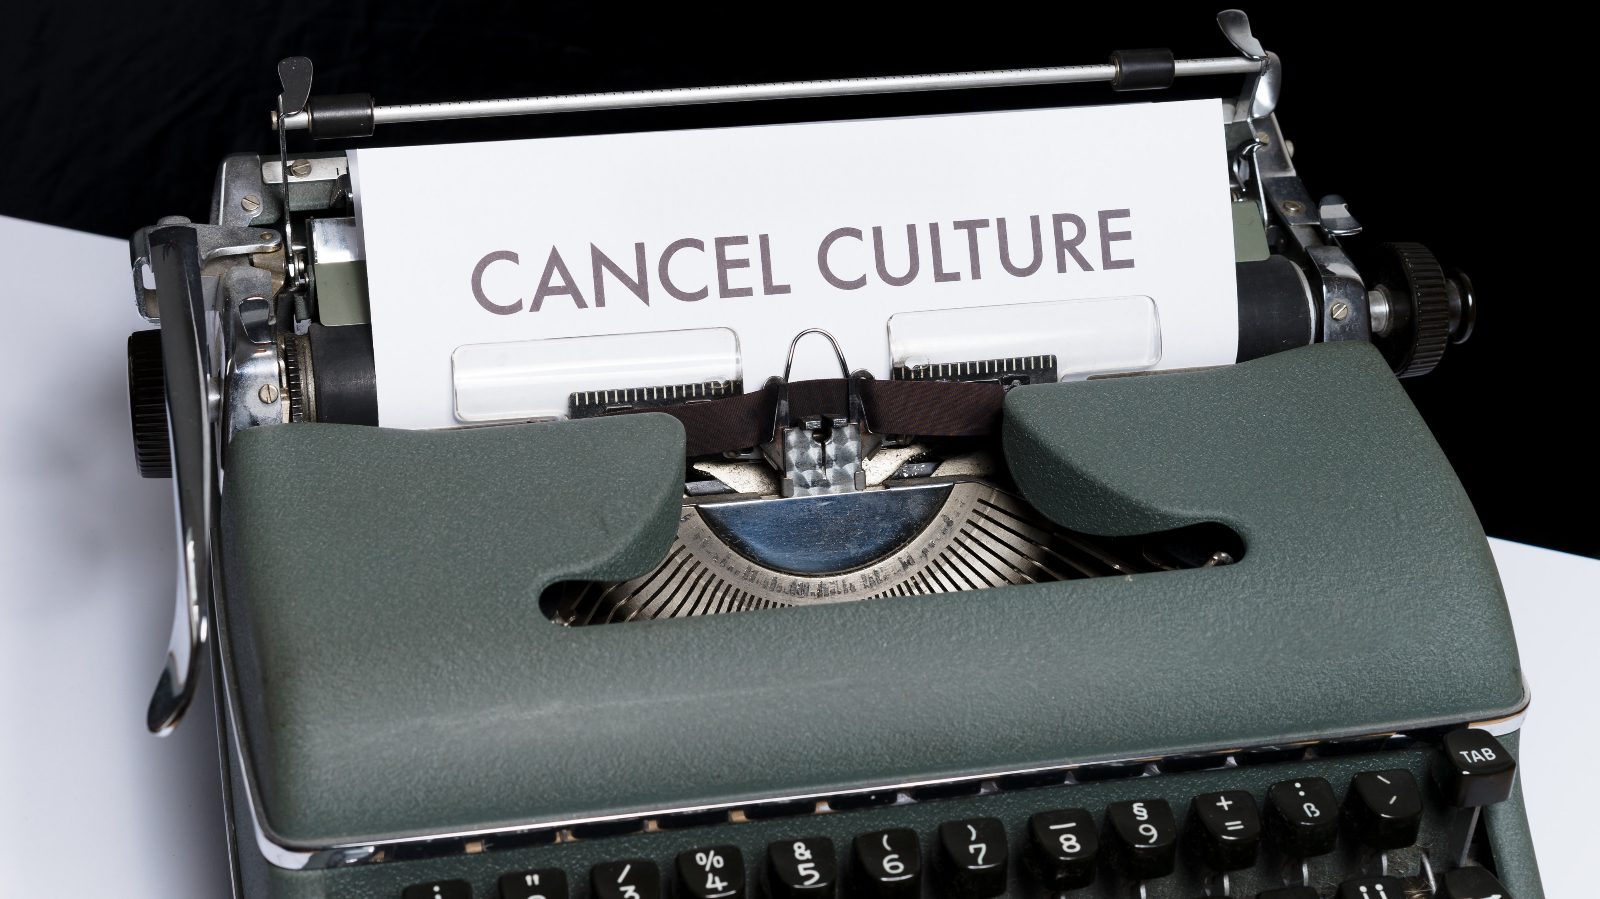 Is Cancel Culture a Real Threat?